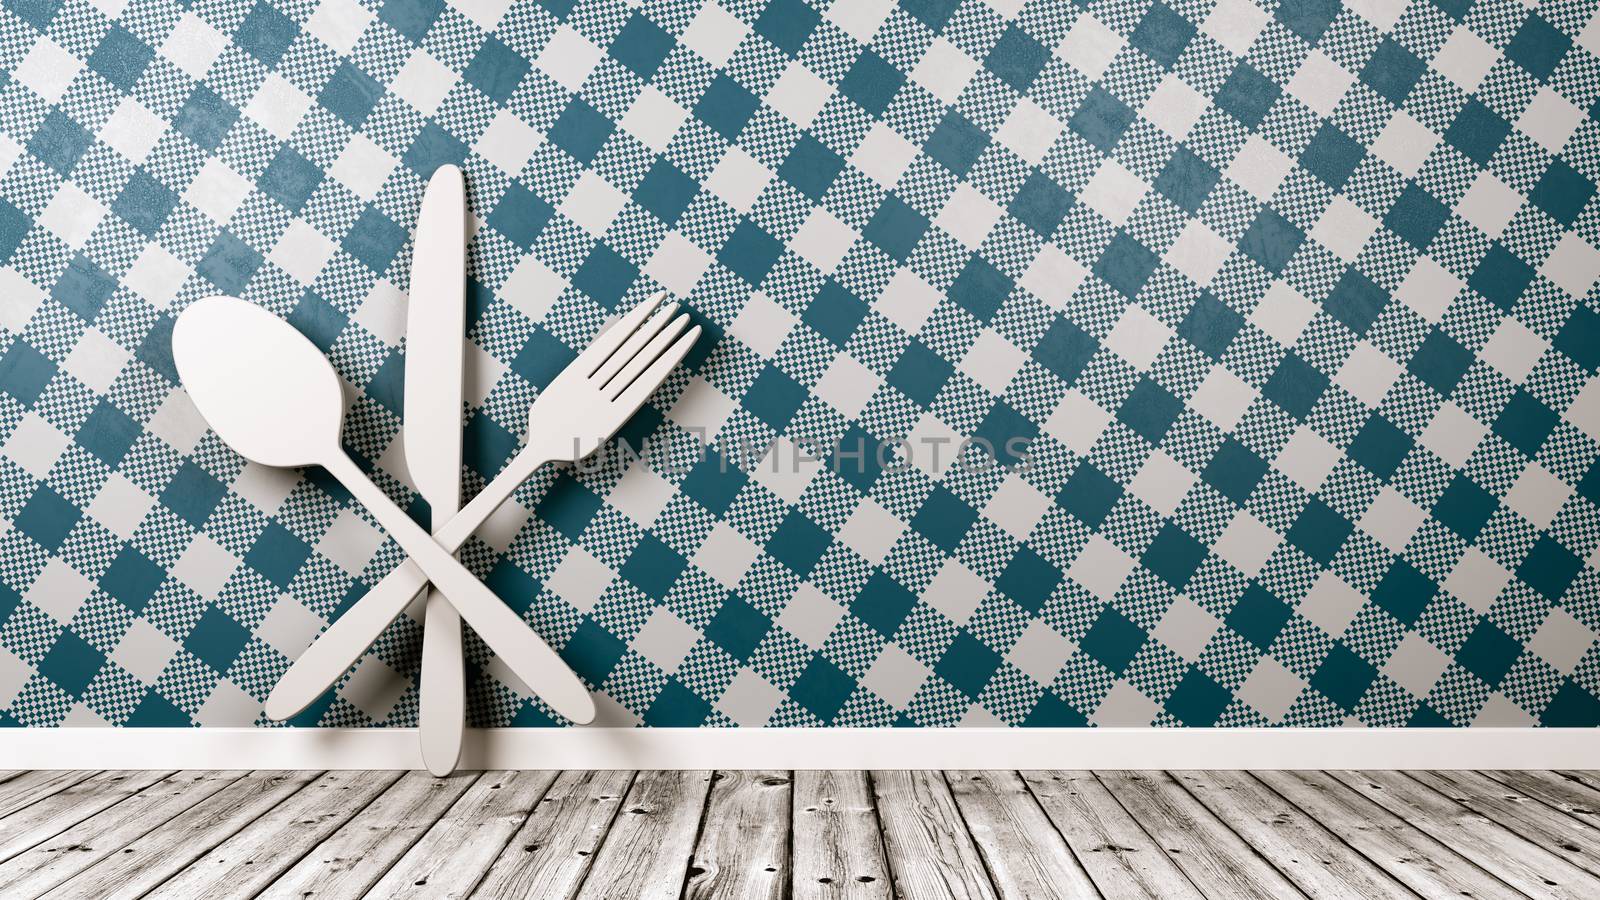 White Silverware 3D Shape on Wooden Floor Against Table Cloth Style Blue Wall with Copy Space 3D Illustration